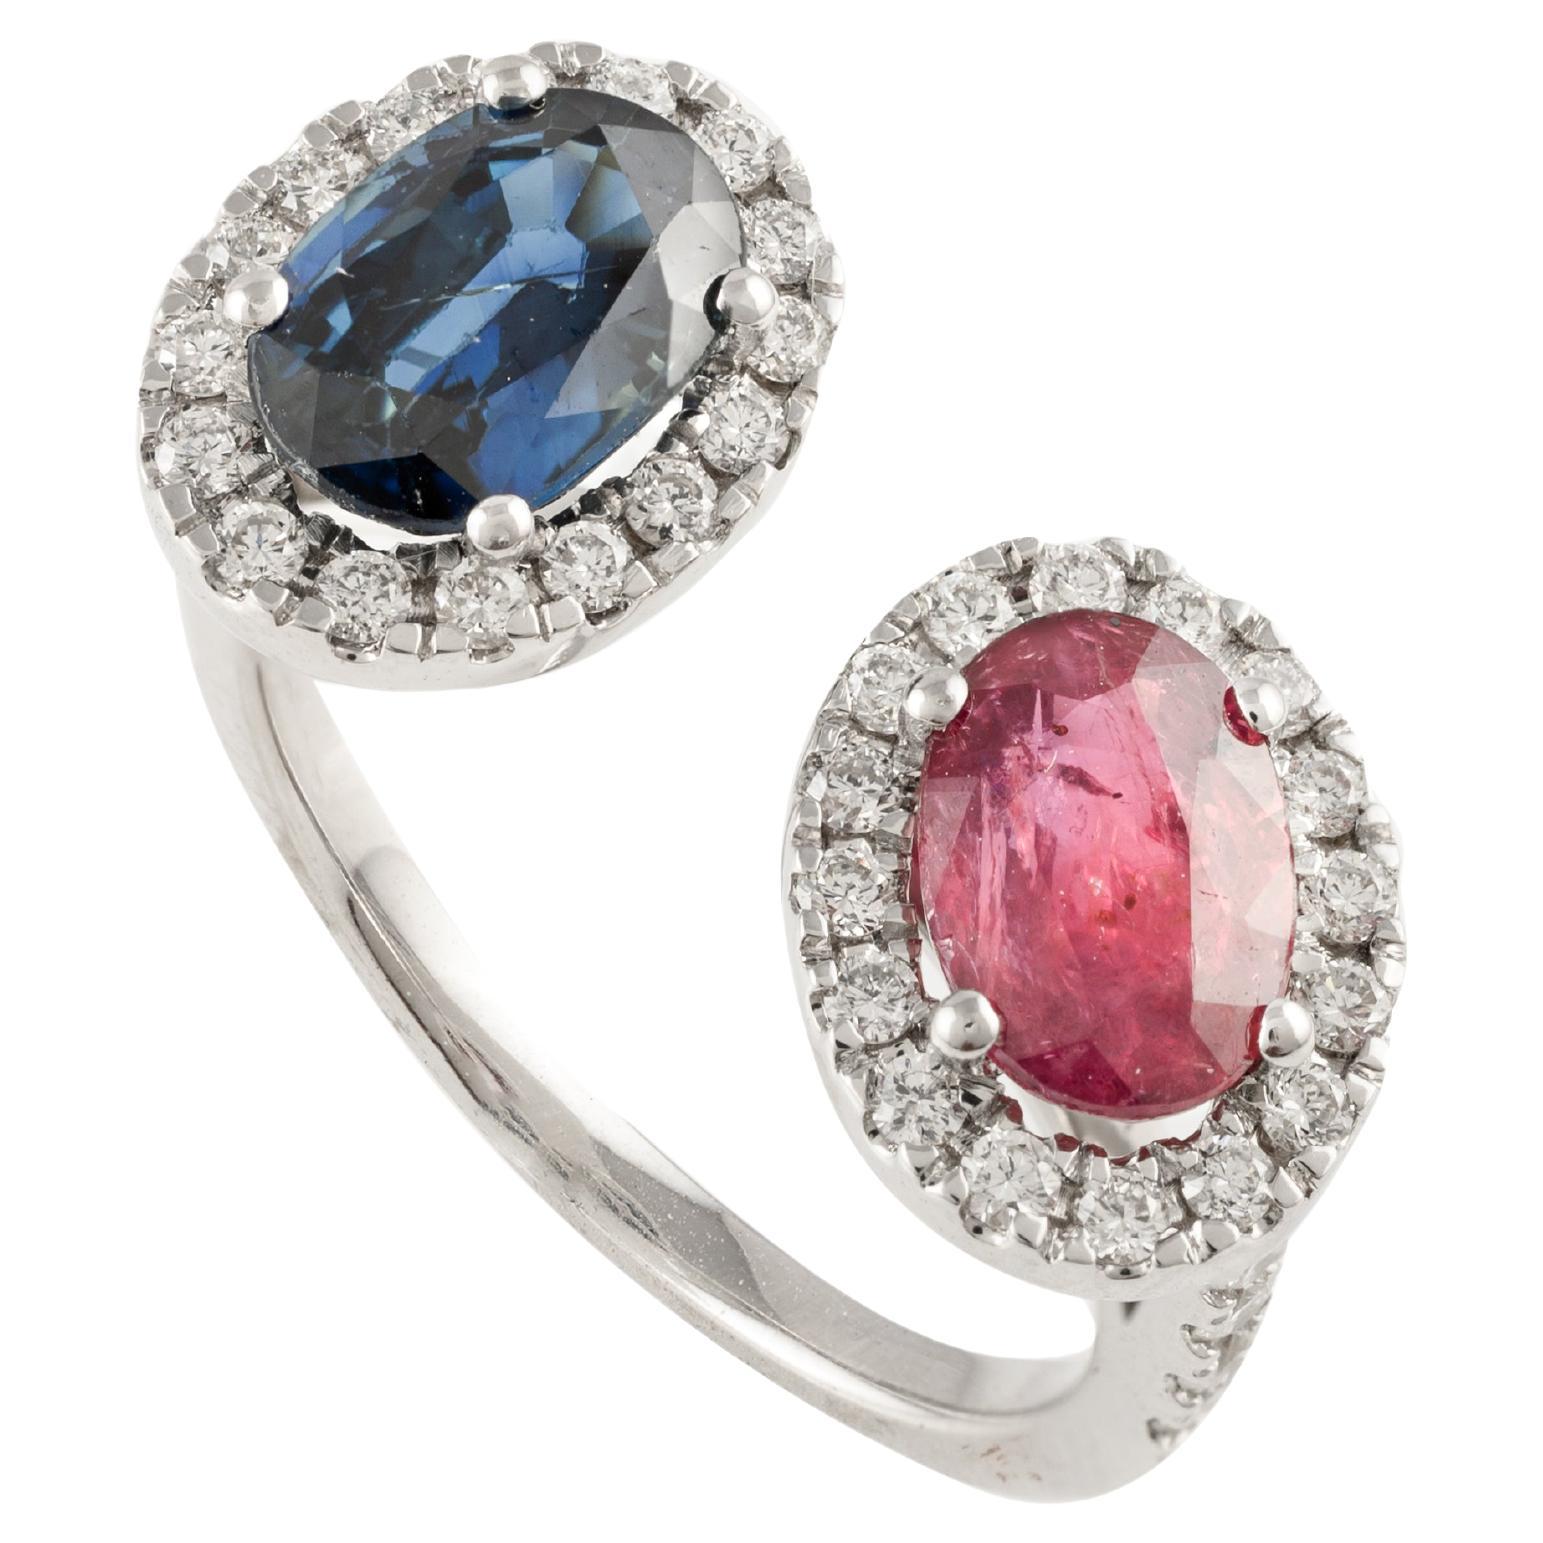 For Sale:  Certified Diamond, Ruby and Blue Sapphire Toi et Moi Ring 18k Solid White Gold